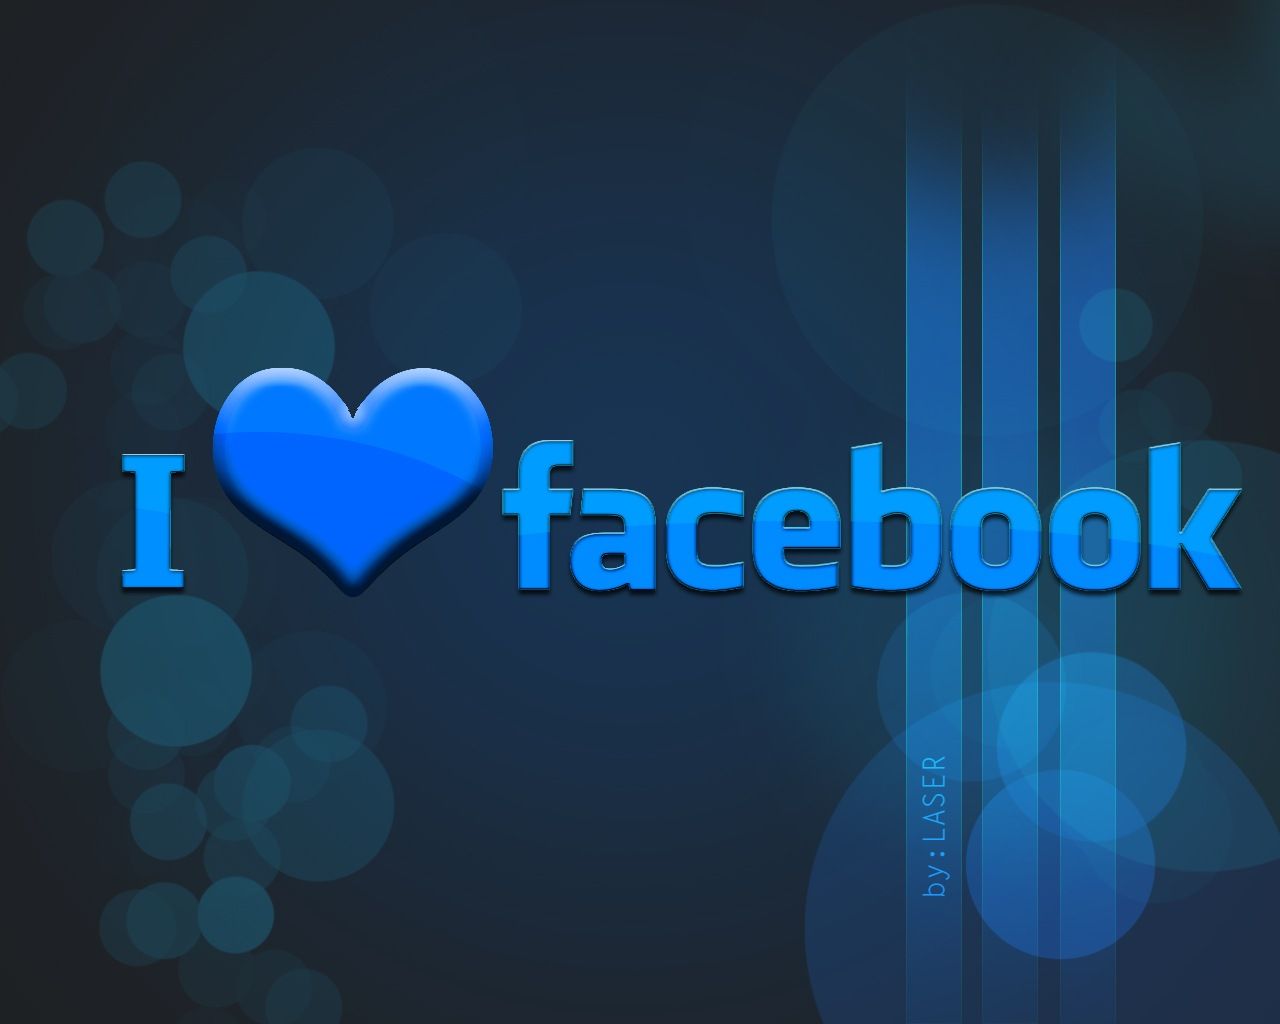 Mobile Facebook Wallpapers | Full HD Pictures